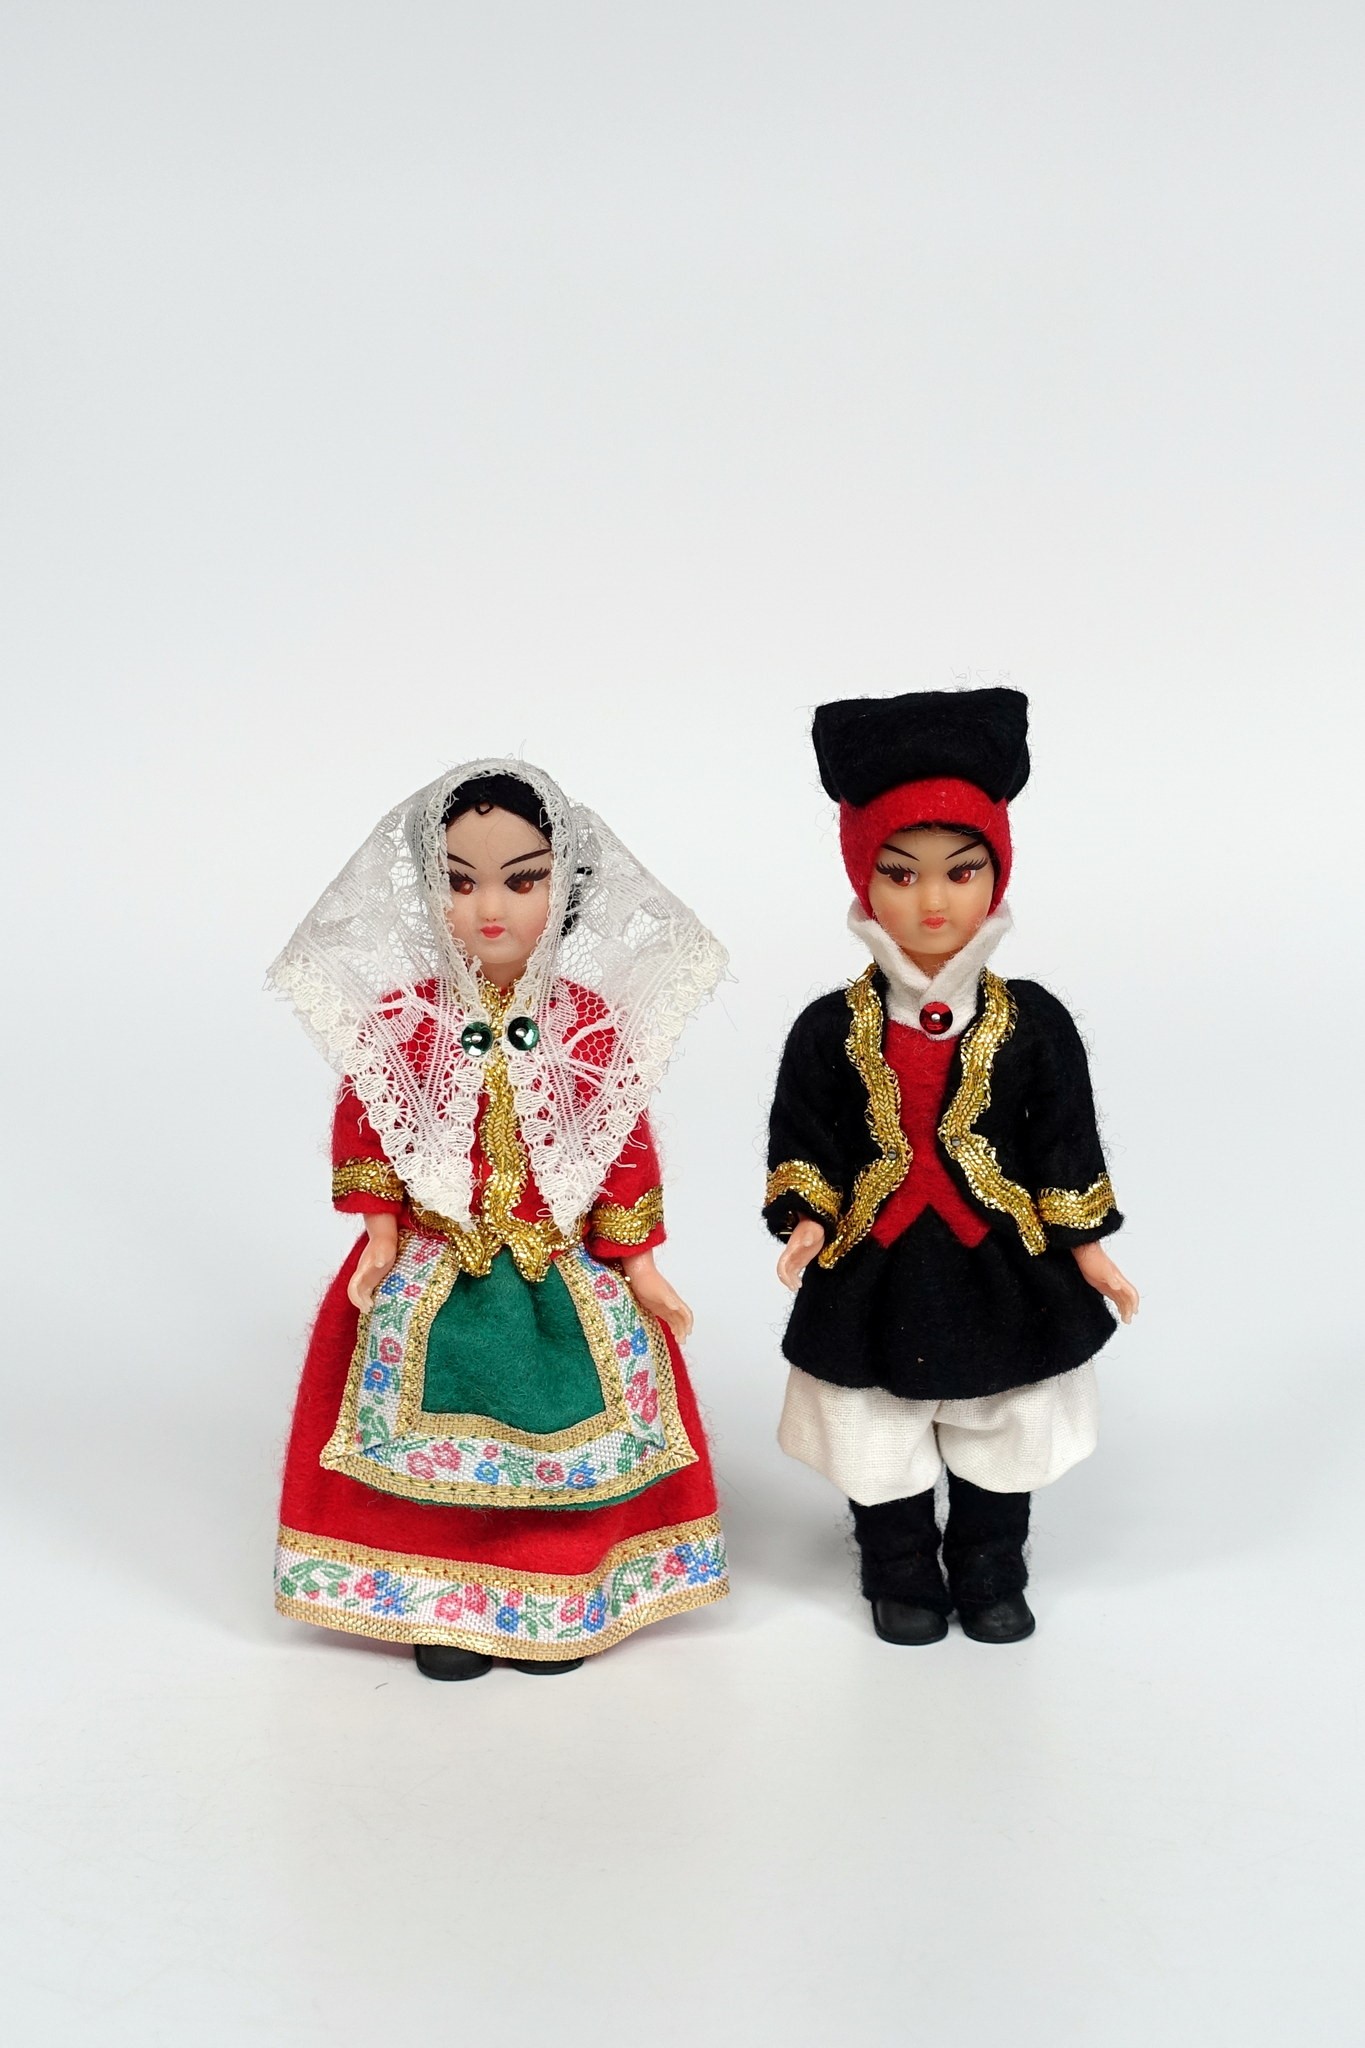 National Costume Dolls | National costume dolls from all over the